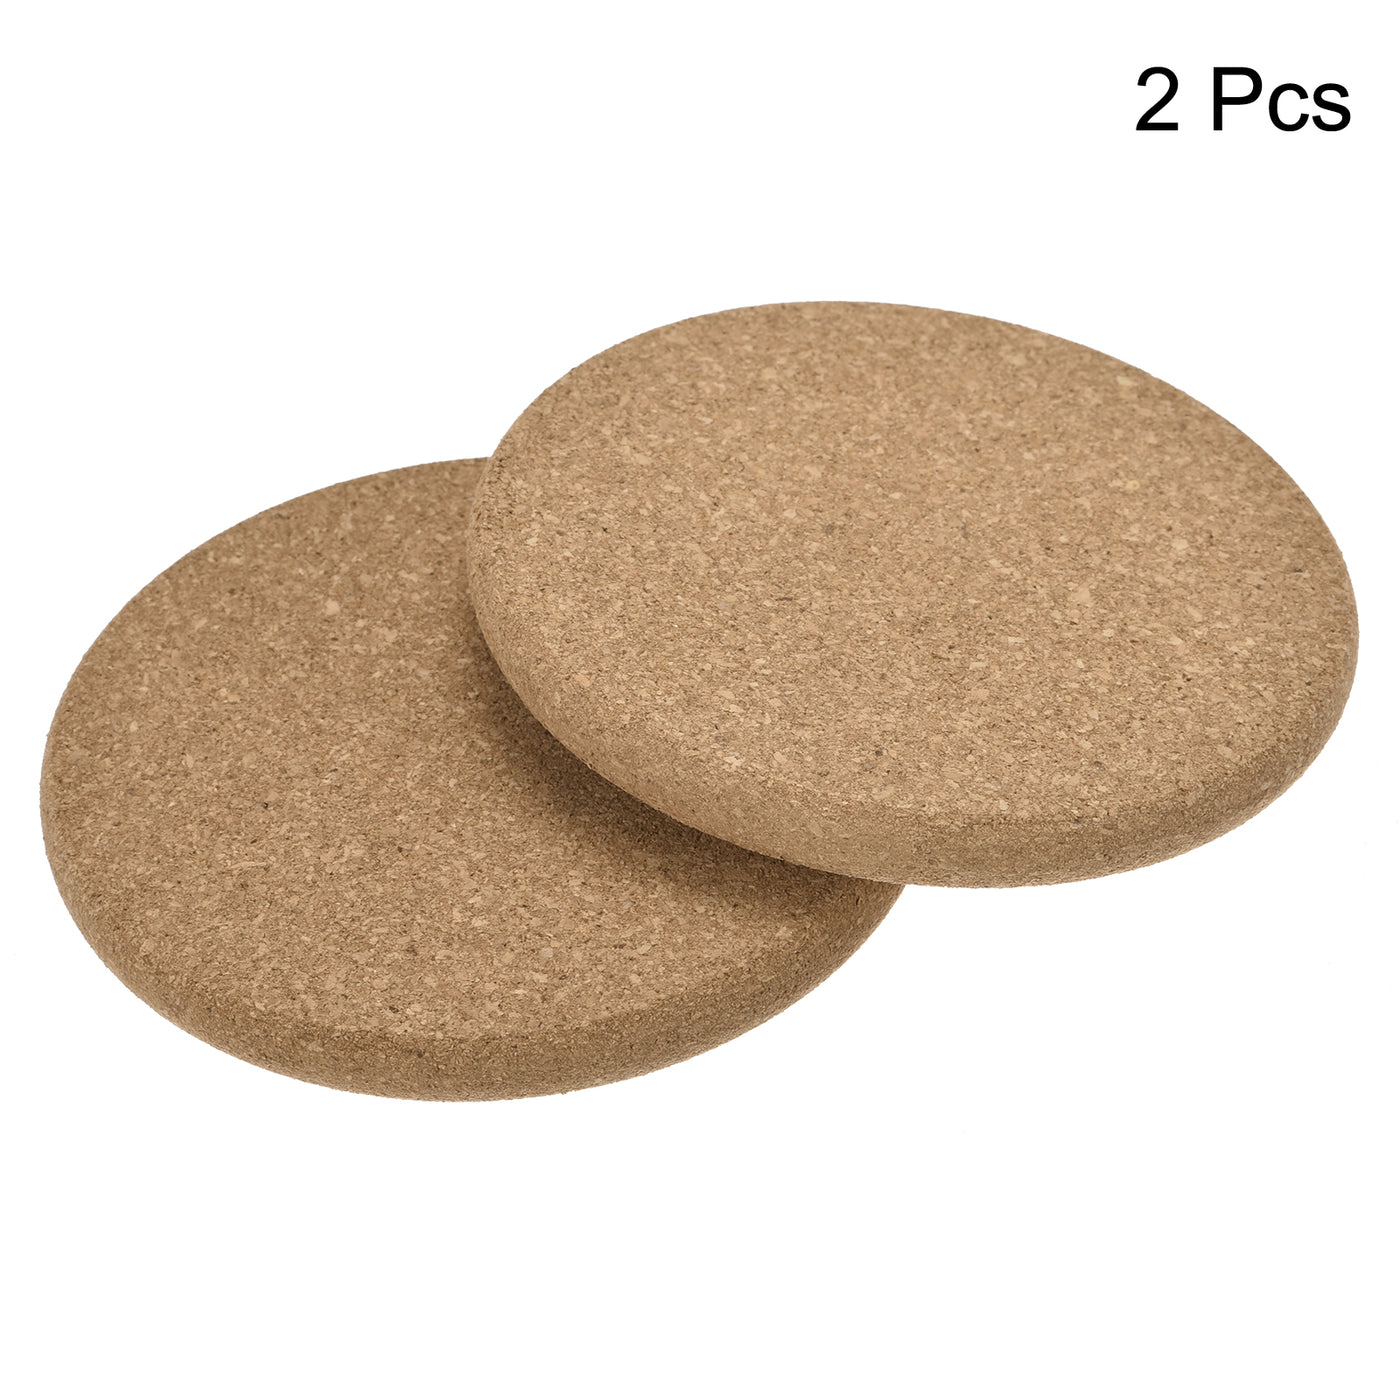 uxcell Uxcell 100mm(3.94") Round Coasters 10mm Thick Cork Cup Mat Pad Round Edge 2pcs